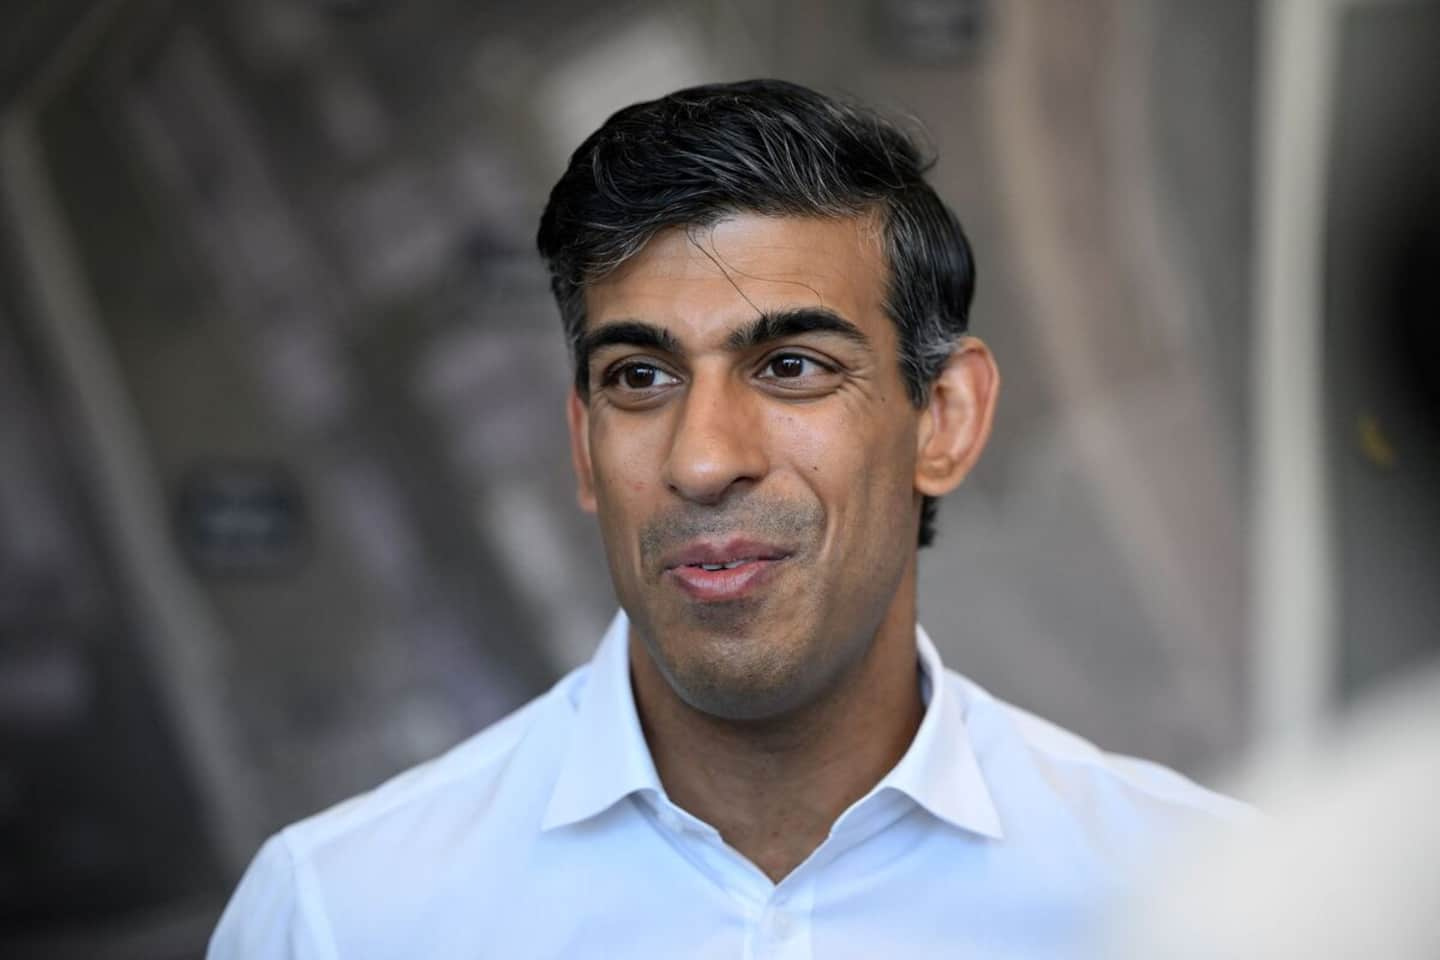 United Kingdom: Rishi Sunak still in the lead in the race for Downing Street